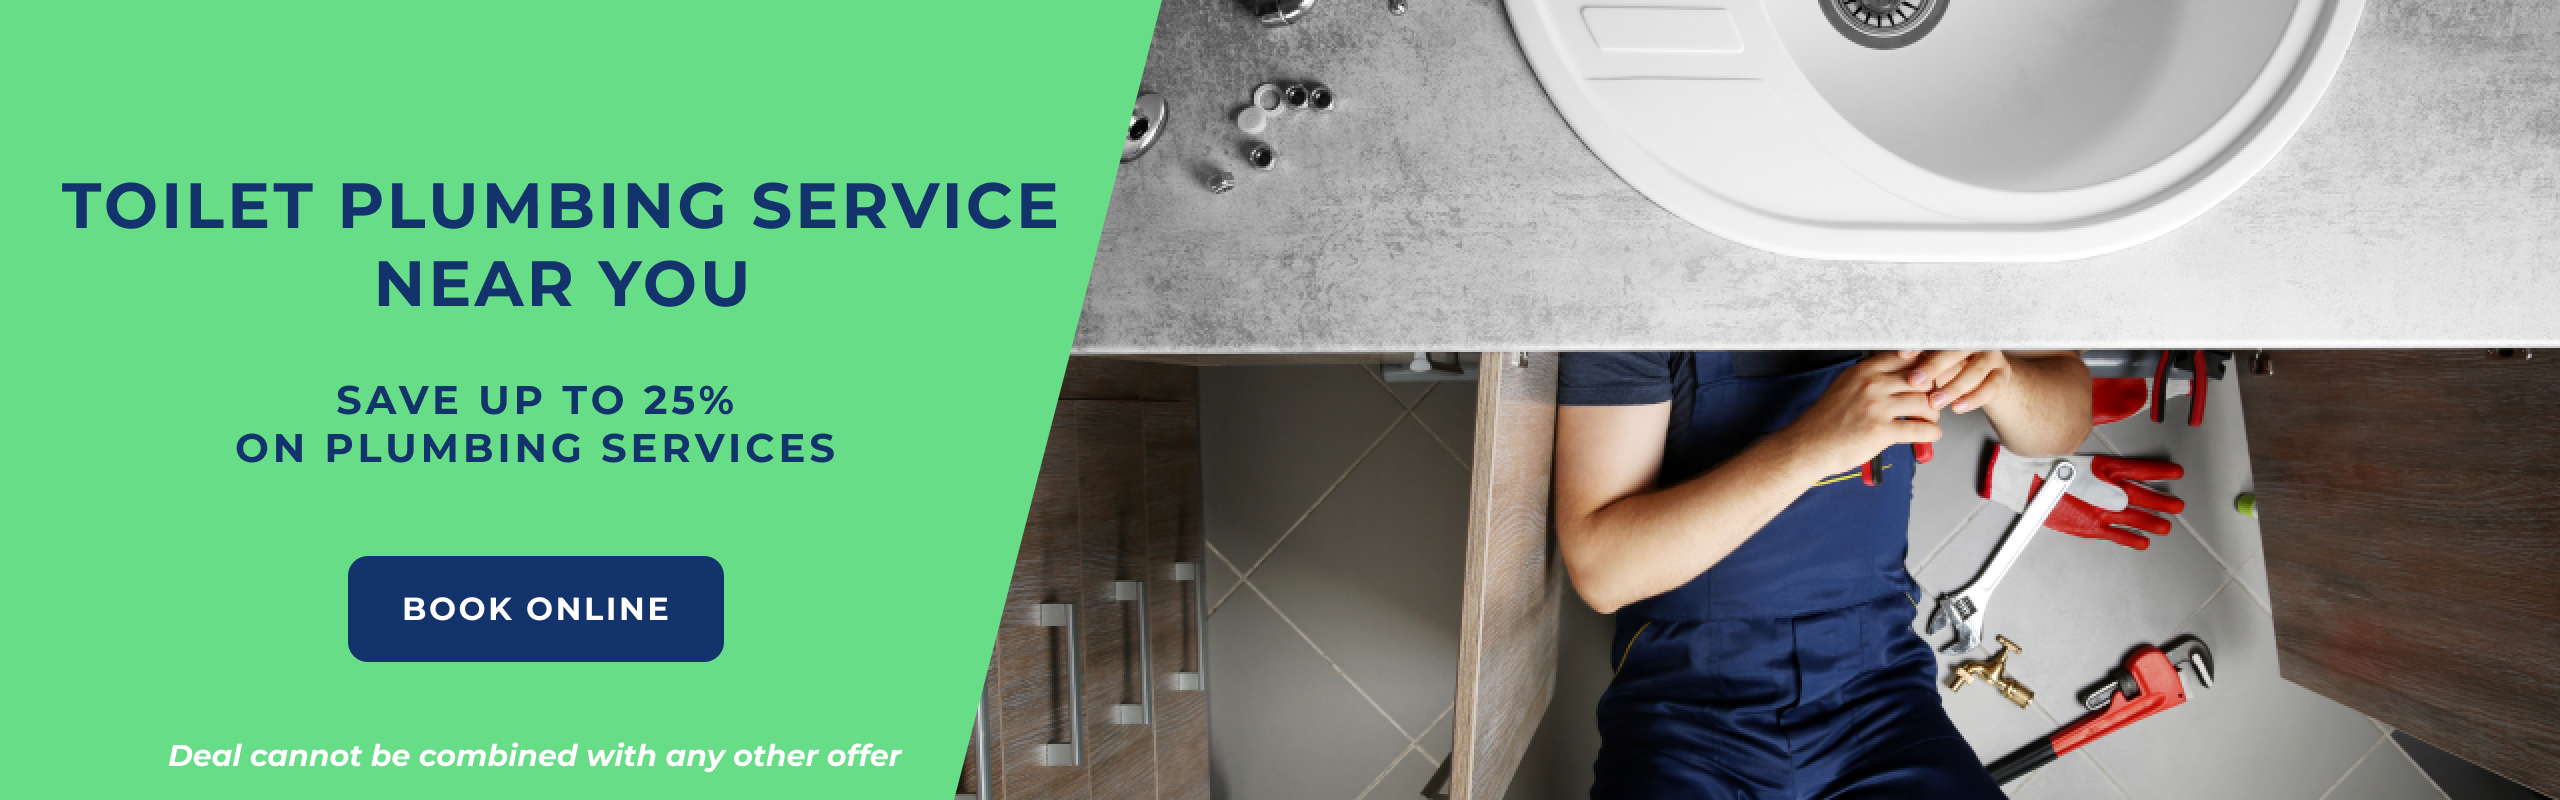 Toilet Services in Kingston: Save up to 25% on plumbing services